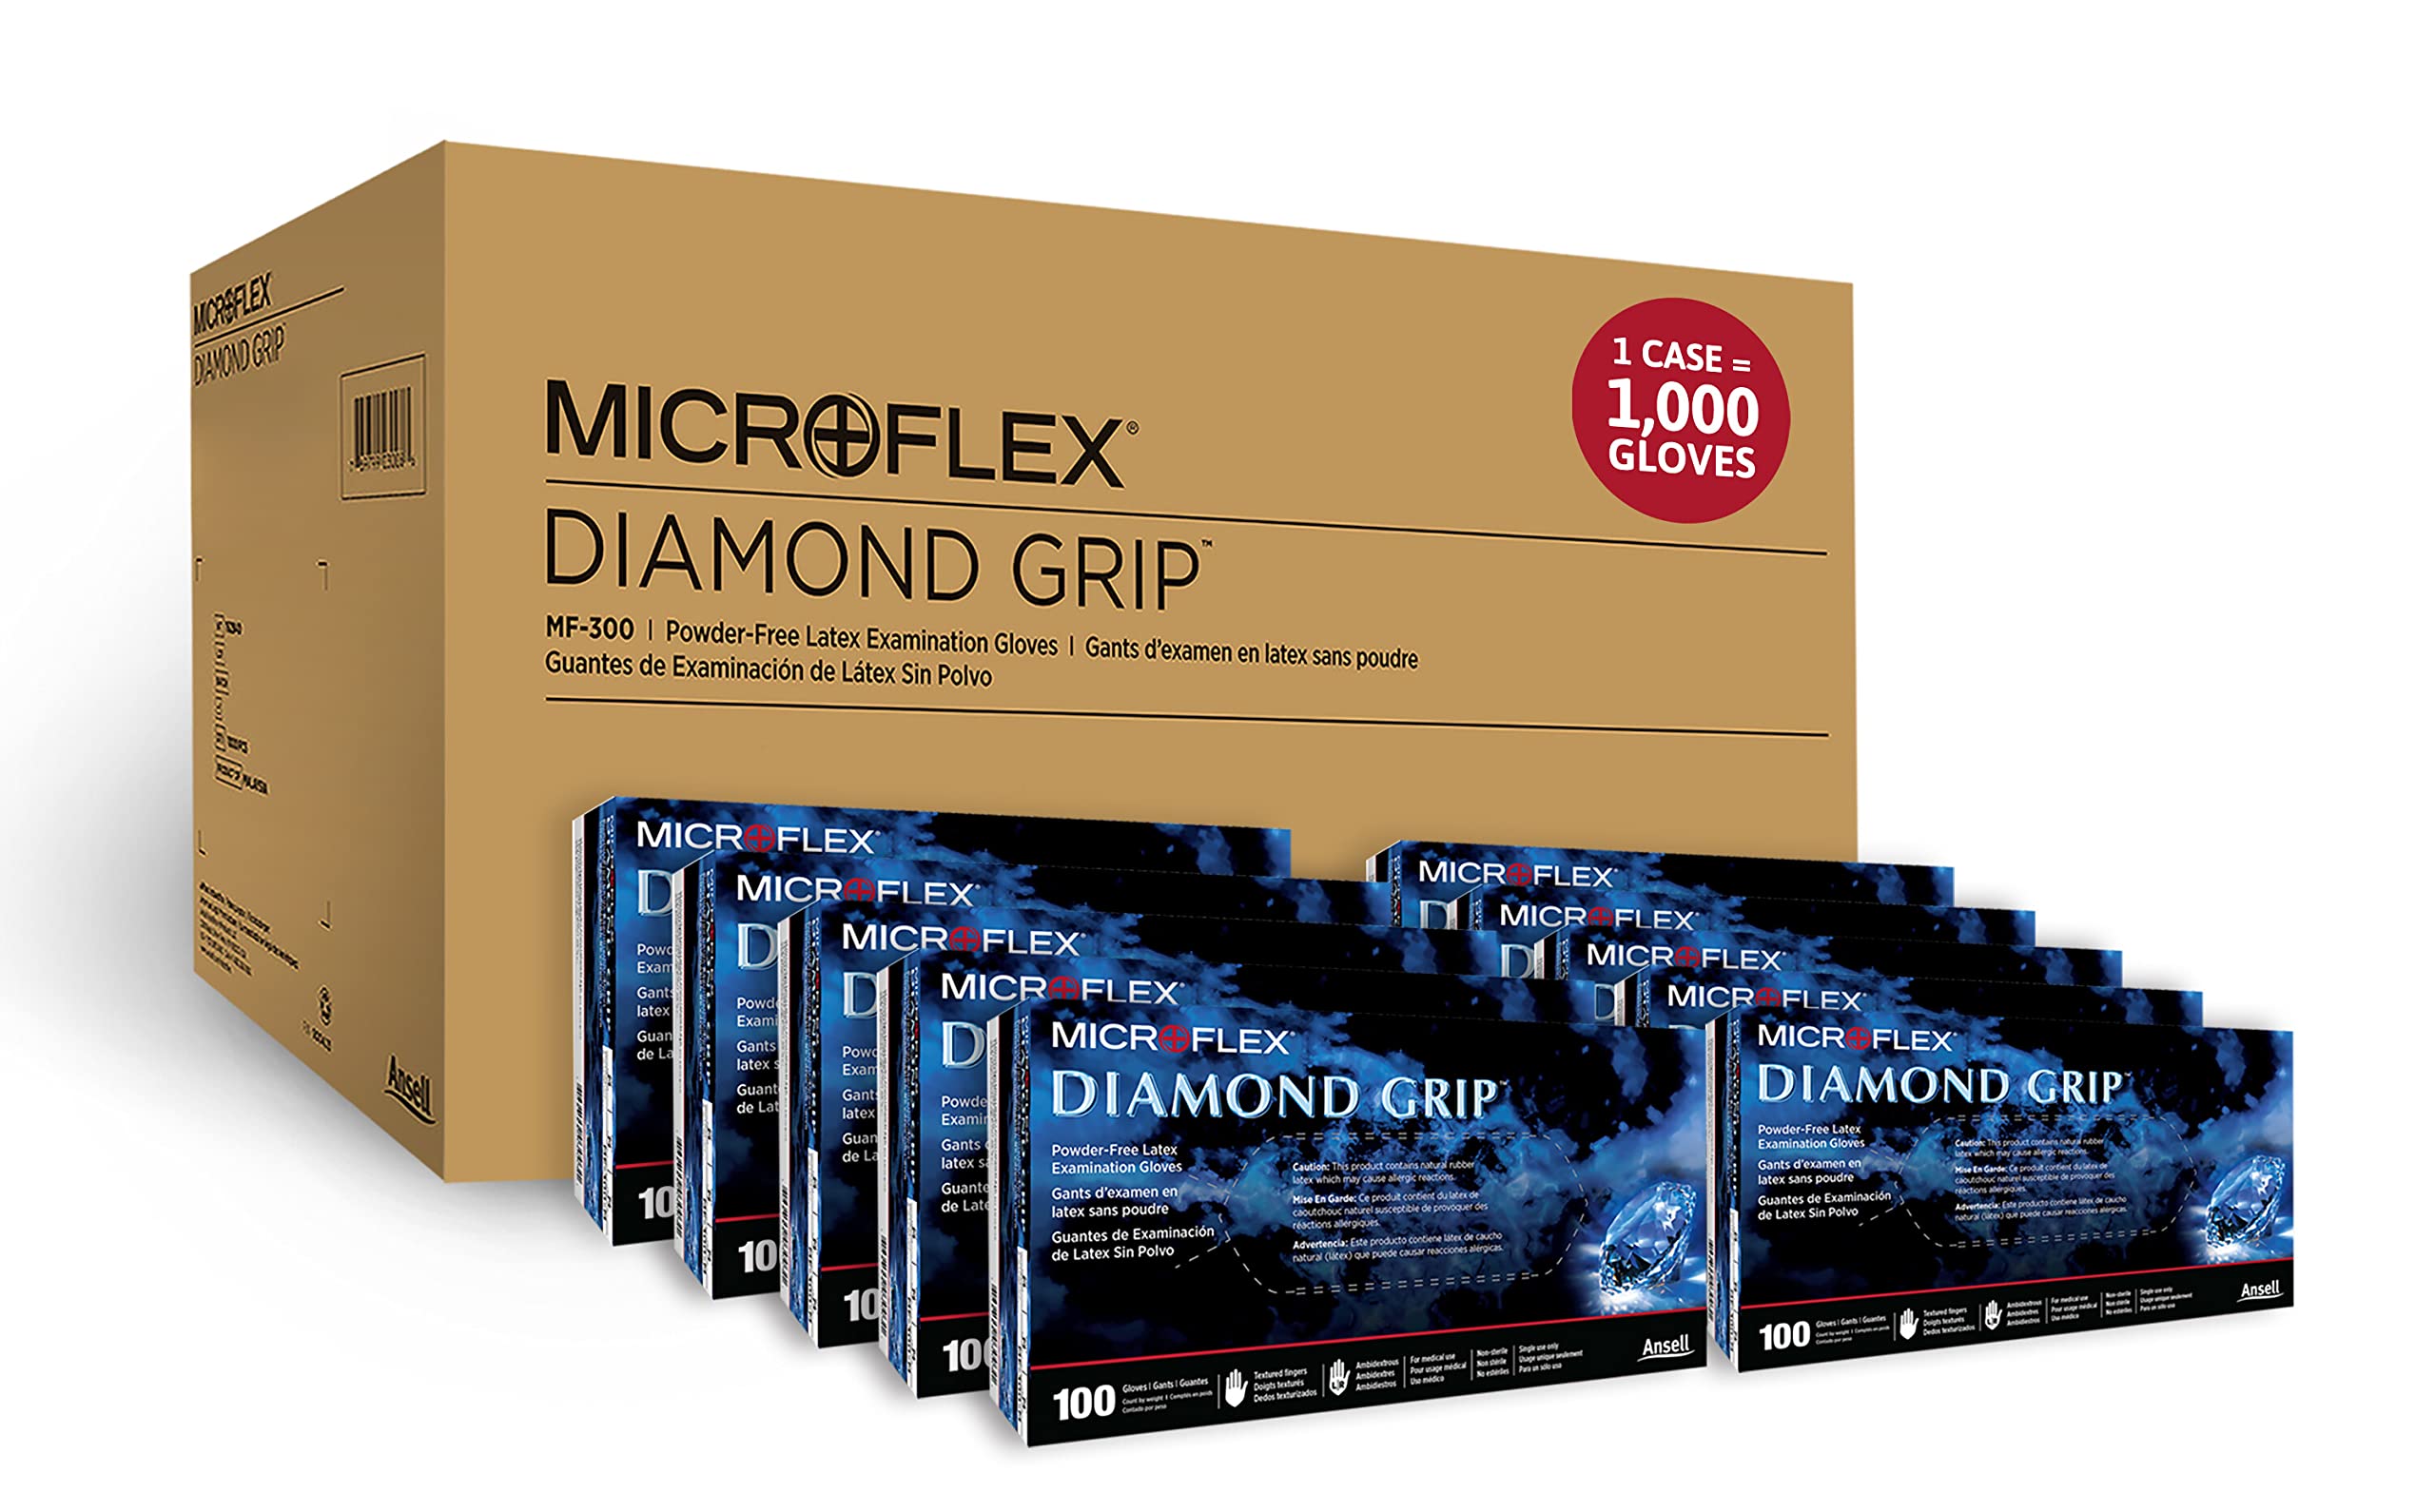 Microflex Diamond Grip MF-300 Disposable Latex Gloves for Automotive, Machinery Industries - Medium, Natural Clear (Case of 1000)